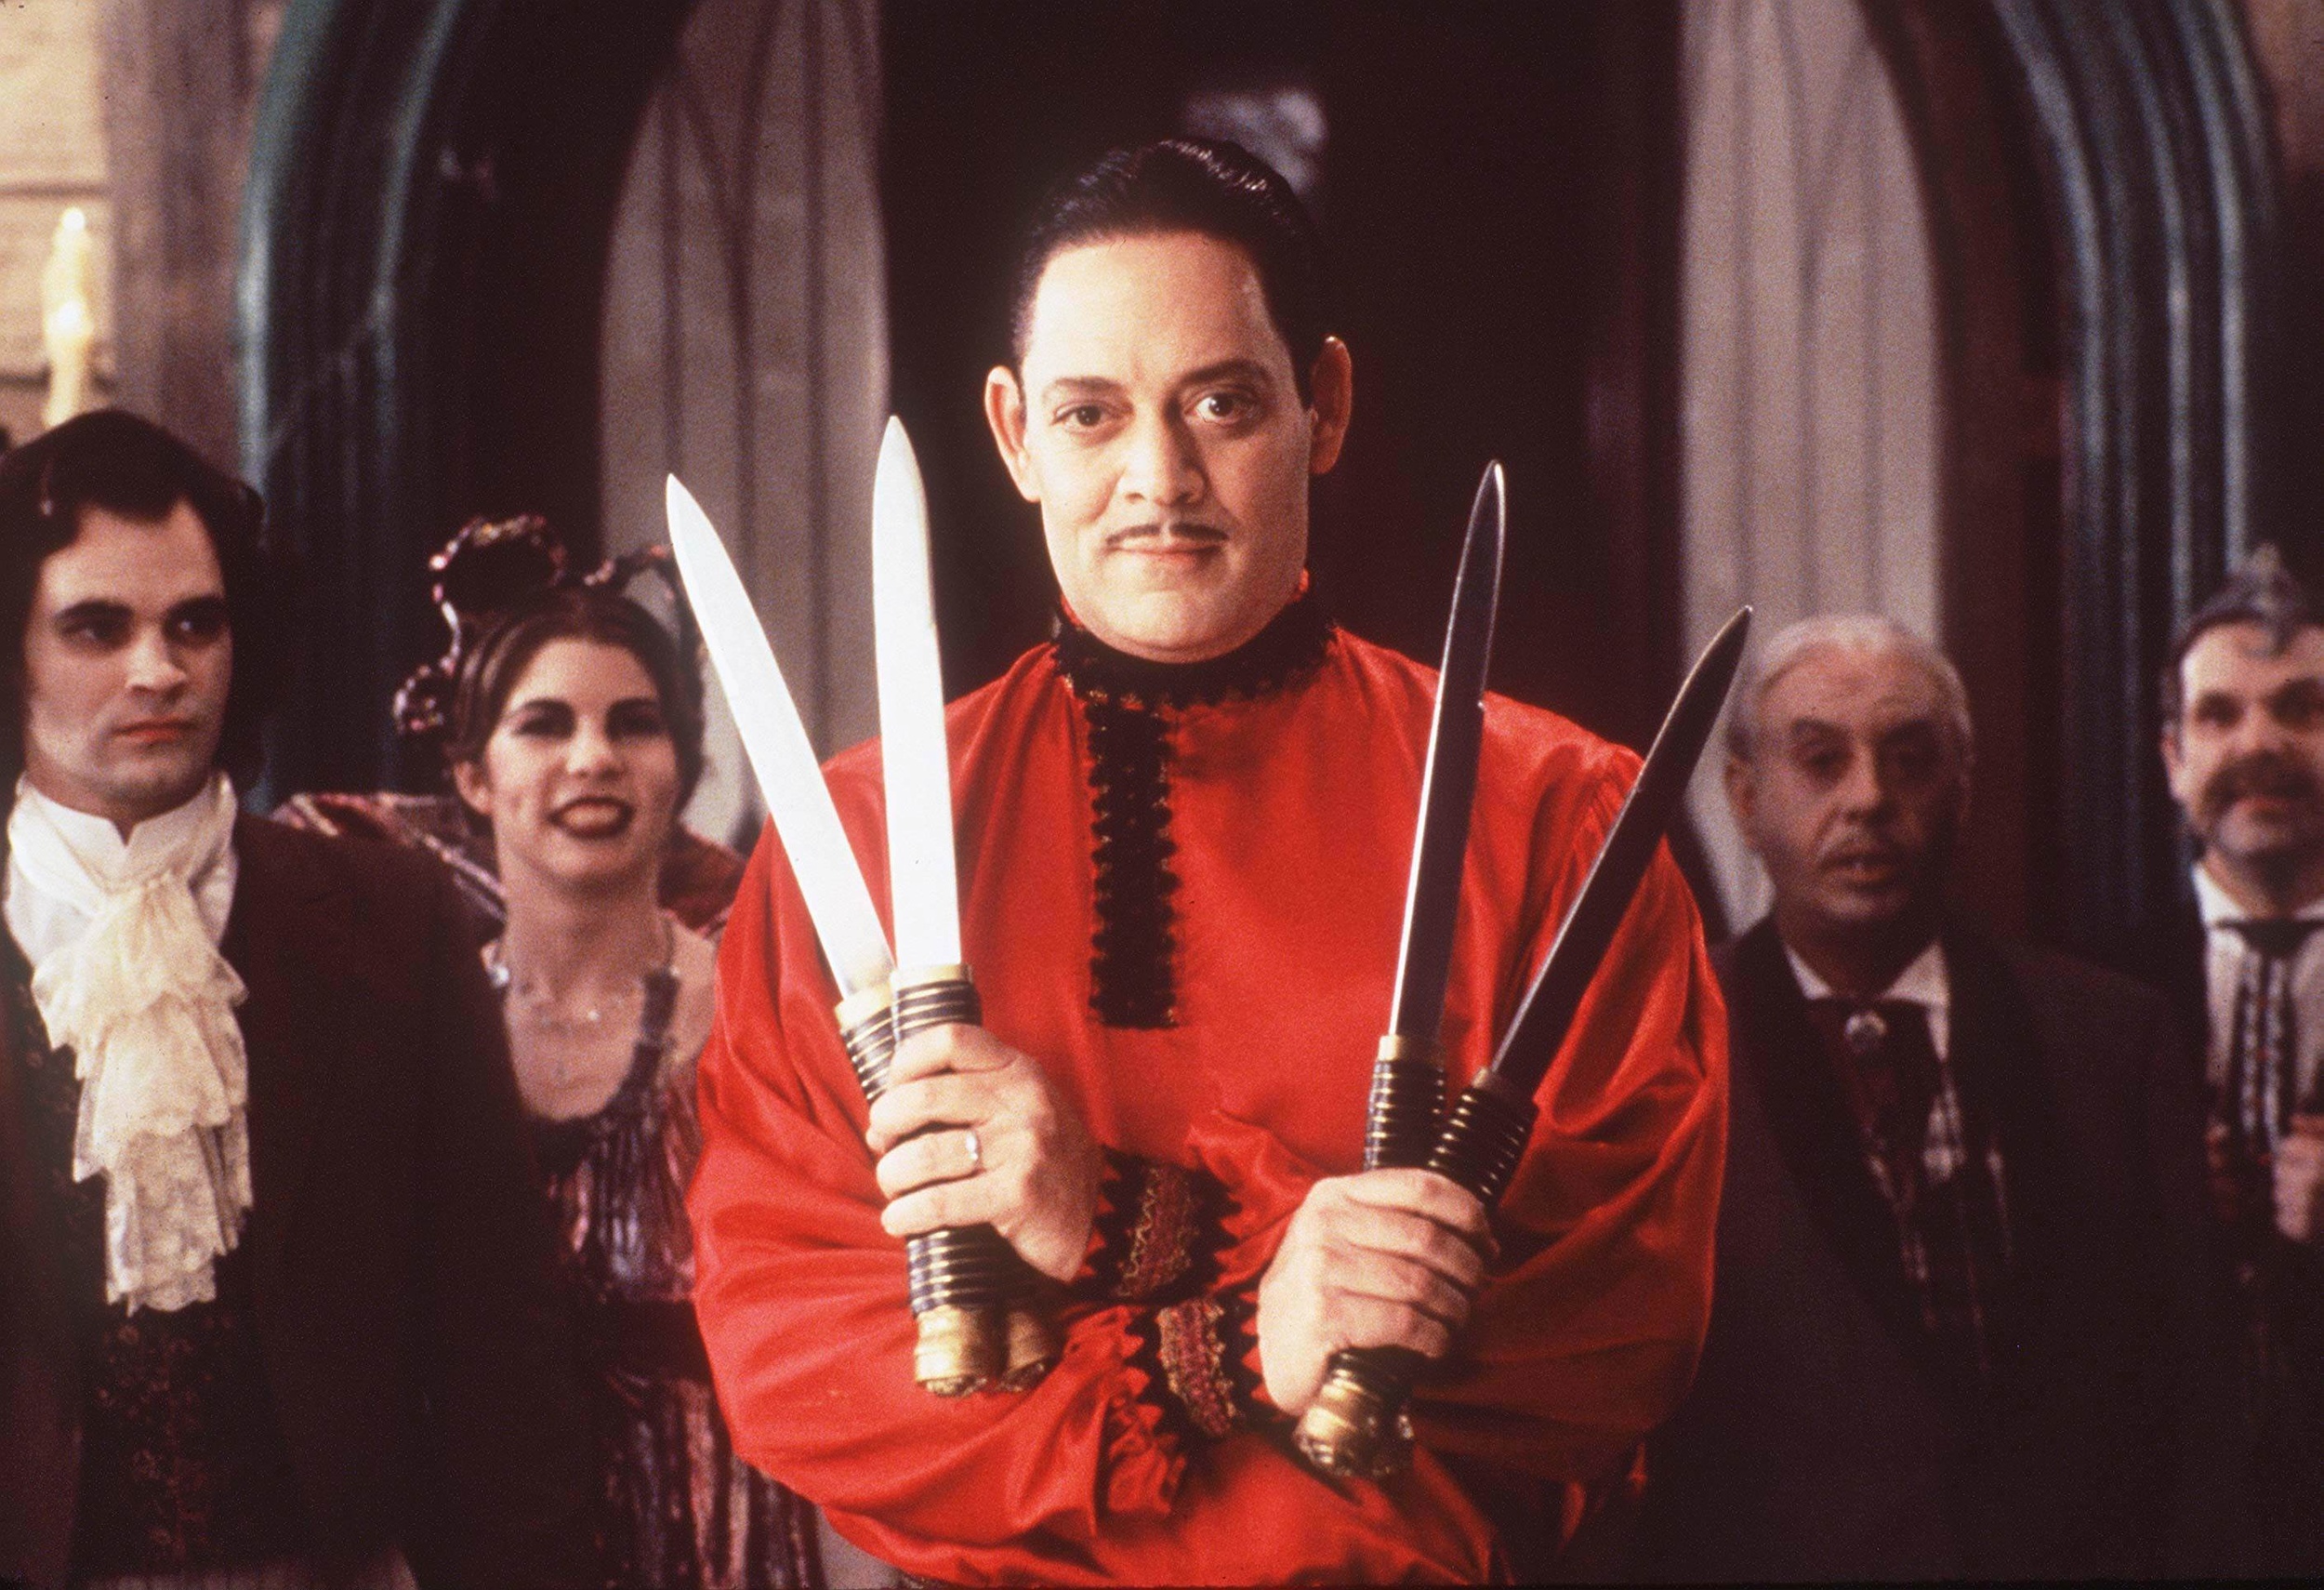 <p>Julia said that was playing Gomez was by far his favorite role, and he loved when fans told him how much they loved his work in the <em>Addams Family</em> movies. Sadly, the actor died in 1994 at the age of 54. His family said that at the end of his life, as he was dealing with his illness, the love he got for playing Gomez really bolstered his spirits.</p><p><a href='https://www.msn.com/en-us/community/channel/vid-cj9pqbr0vn9in2b6ddcd8sfgpfq6x6utp44fssrv6mc2gtybw0us'>Did you enjoy this slideshow? Follow us on MSN to see more of our exclusive entertainment content.</a></p>